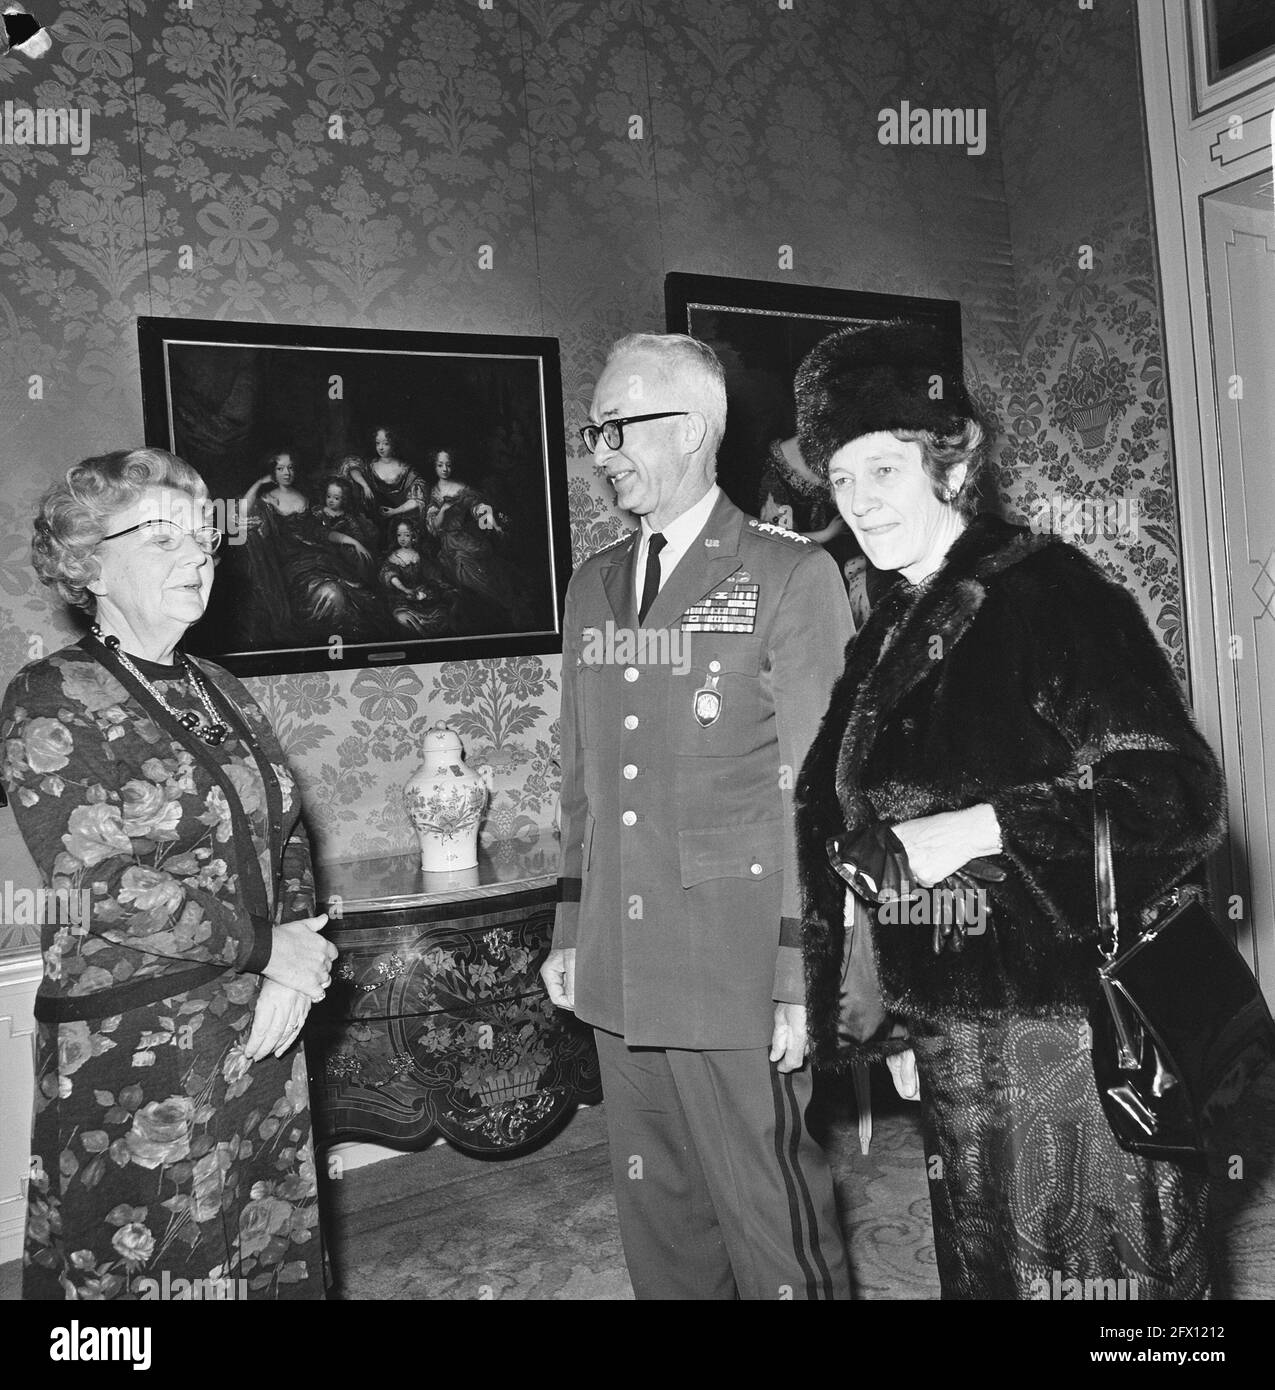 Queen Juliana receives at Huis ten Bosch General Goodpaster (NATO Commander-in-Chief) and his wife, 18 November 1974, generals, queens, paintings, The Netherlands, 20th century press agency photo, news to remember, documentary, historic photography 1945-1990, visual stories, human history of the Twentieth Century, capturing moments in time Stock Photo